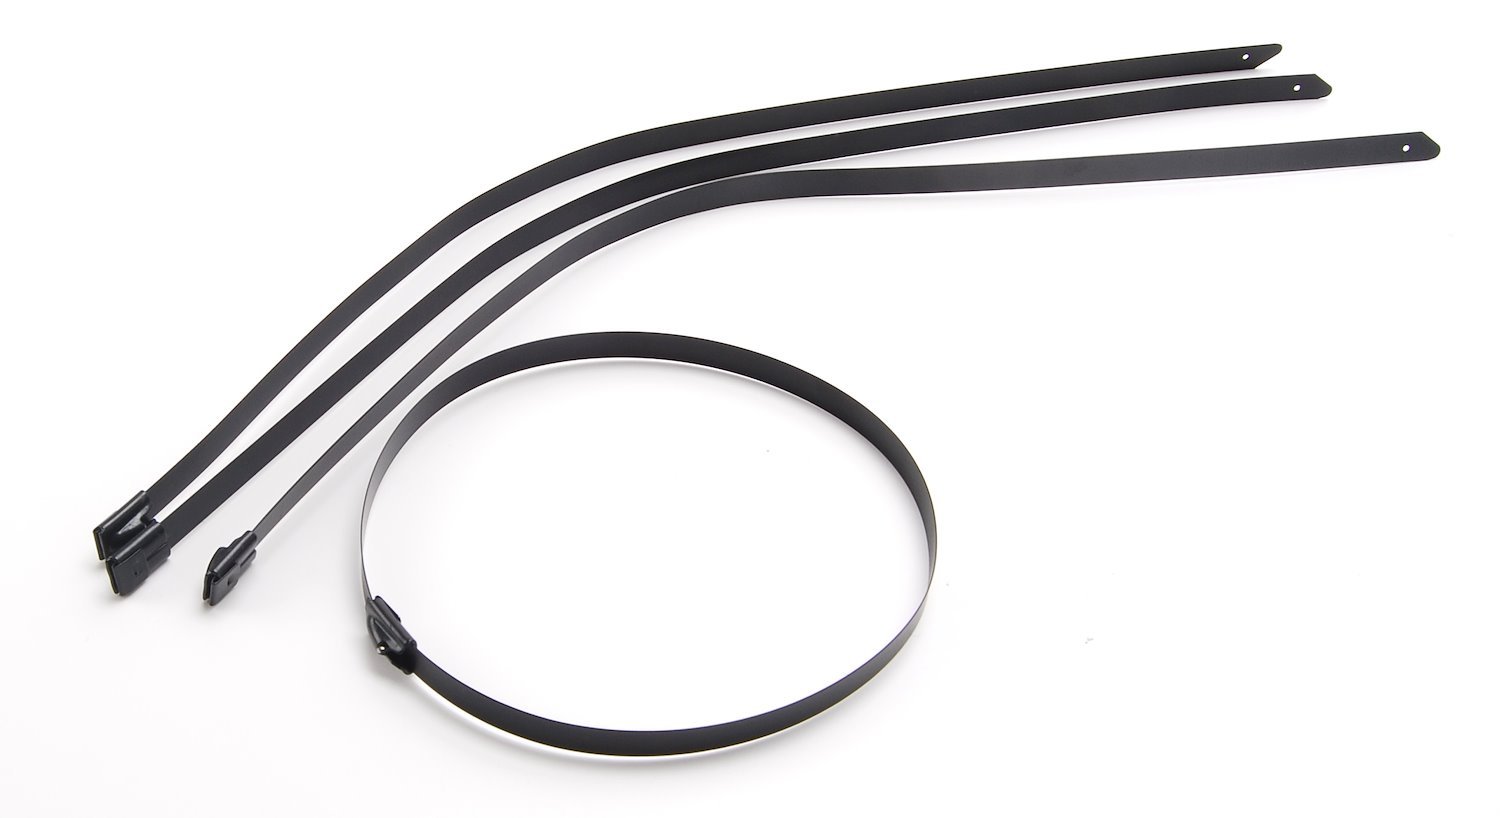 Stainless Wire and Cable Ties [14 in. Black]